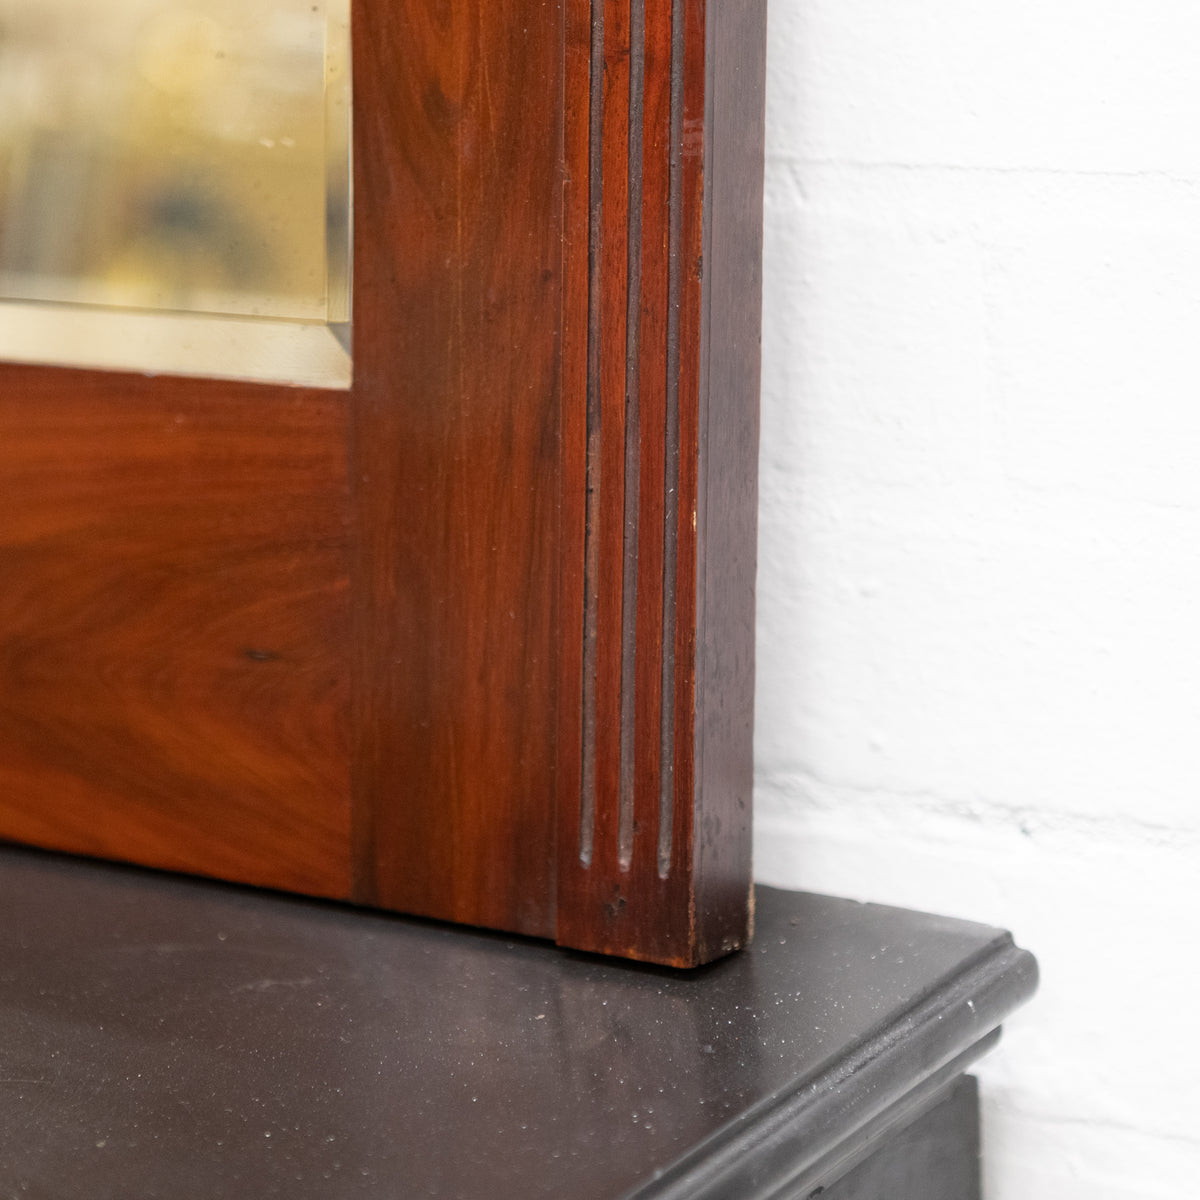 Antique Edwardian Mahogany Bevelled Glass Mirror | The Architectural Forum